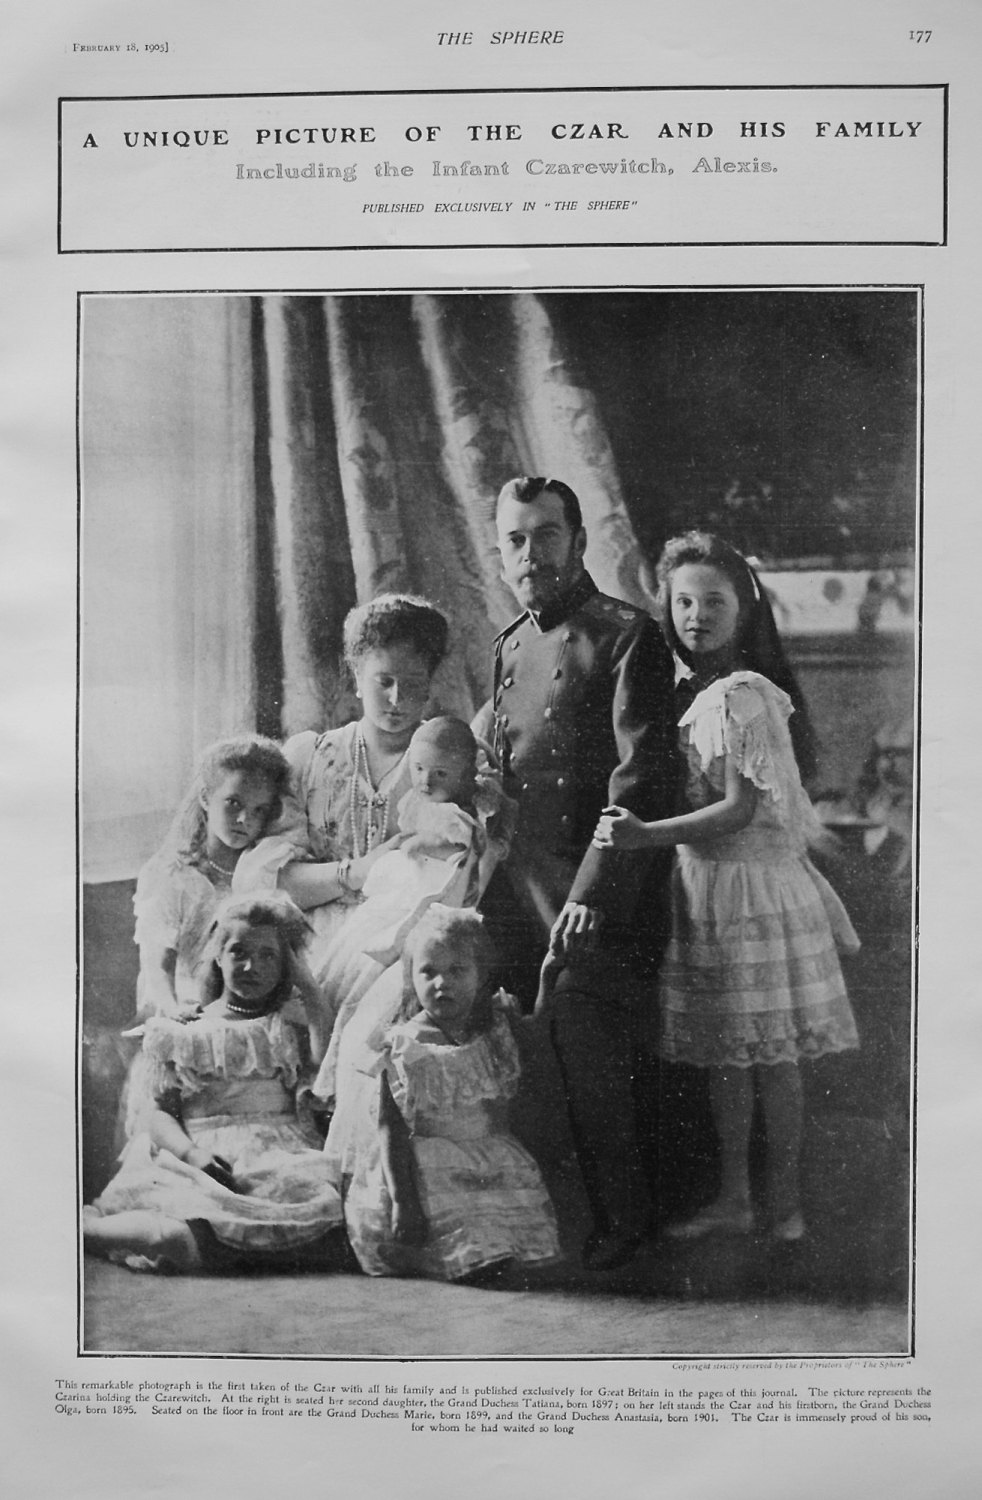 A Unique Picture of the Czar and His Family including the Infant Czarevitch